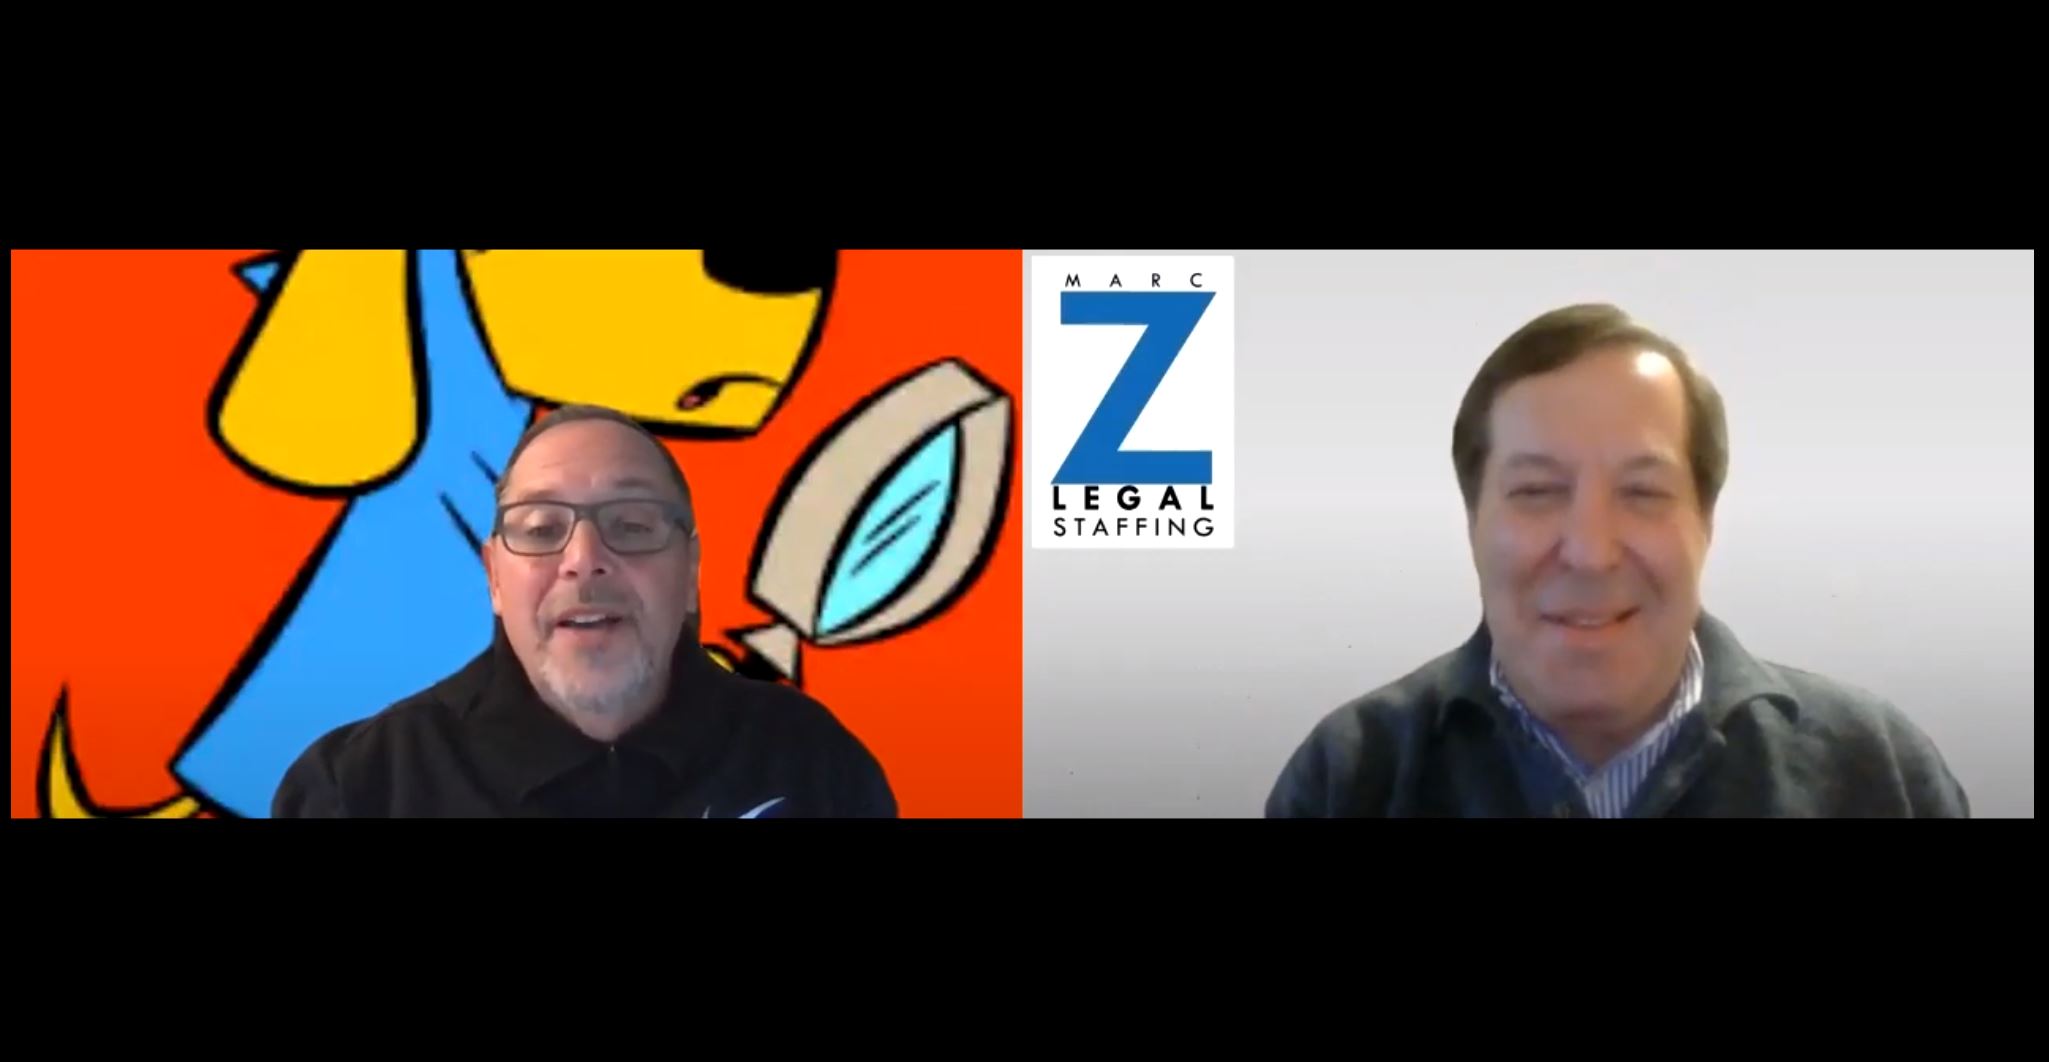 “What Can I Do To Help My Business Survive?” with Marc Zwetchkenbaum of Marc Z Legal Staffing